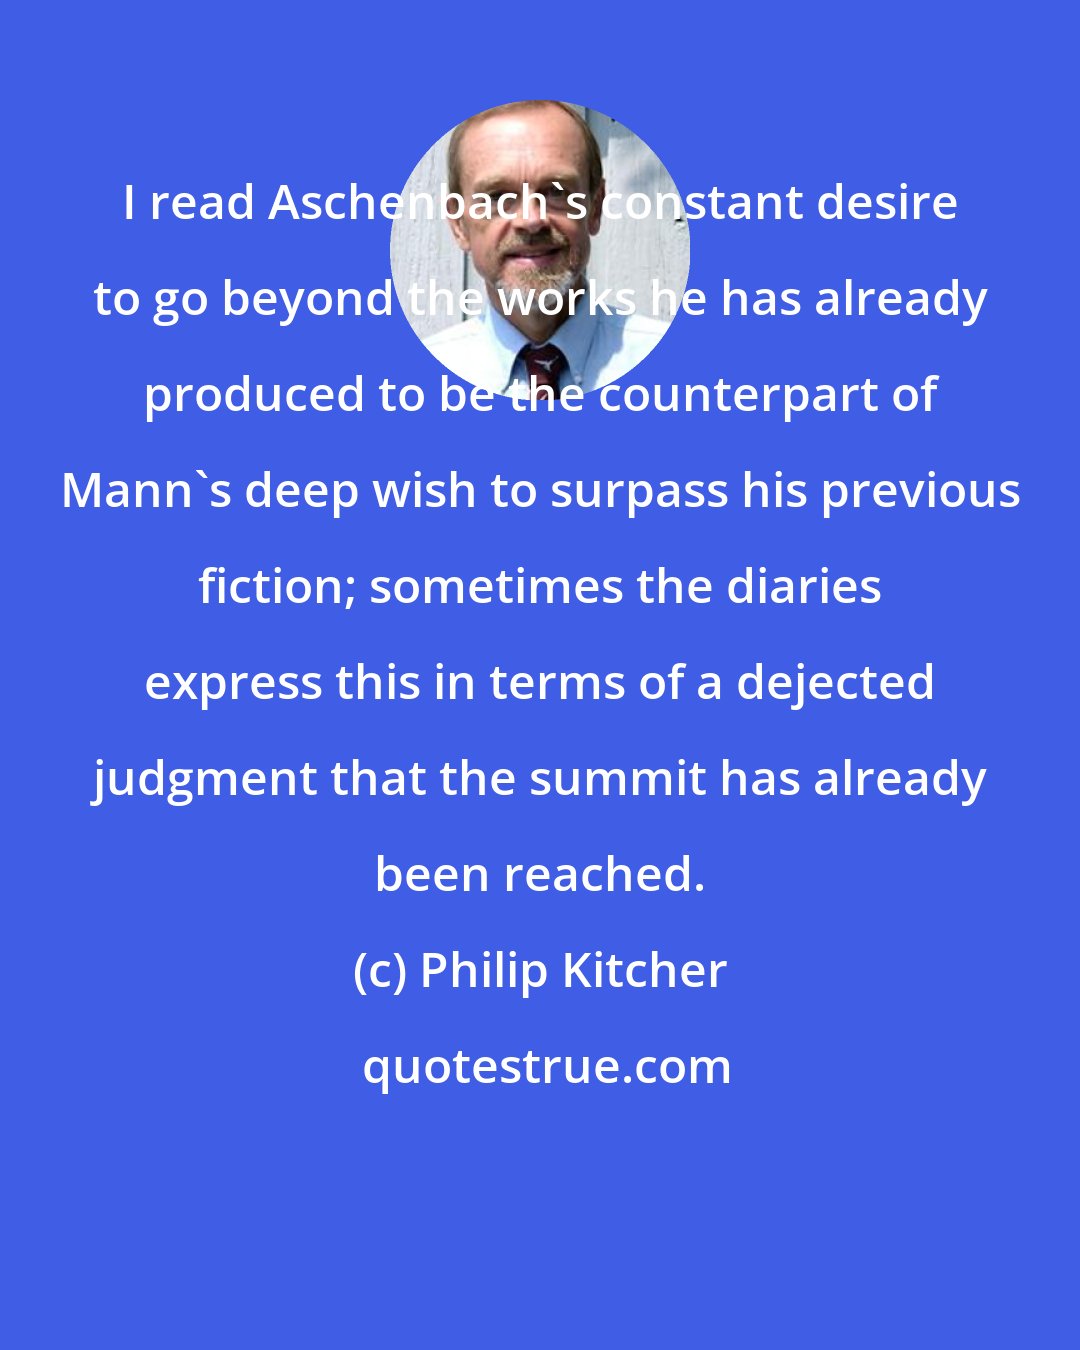 Philip Kitcher: I read Aschenbach's constant desire to go beyond the works he has already produced to be the counterpart of Mann's deep wish to surpass his previous fiction; sometimes the diaries express this in terms of a dejected judgment that the summit has already been reached.